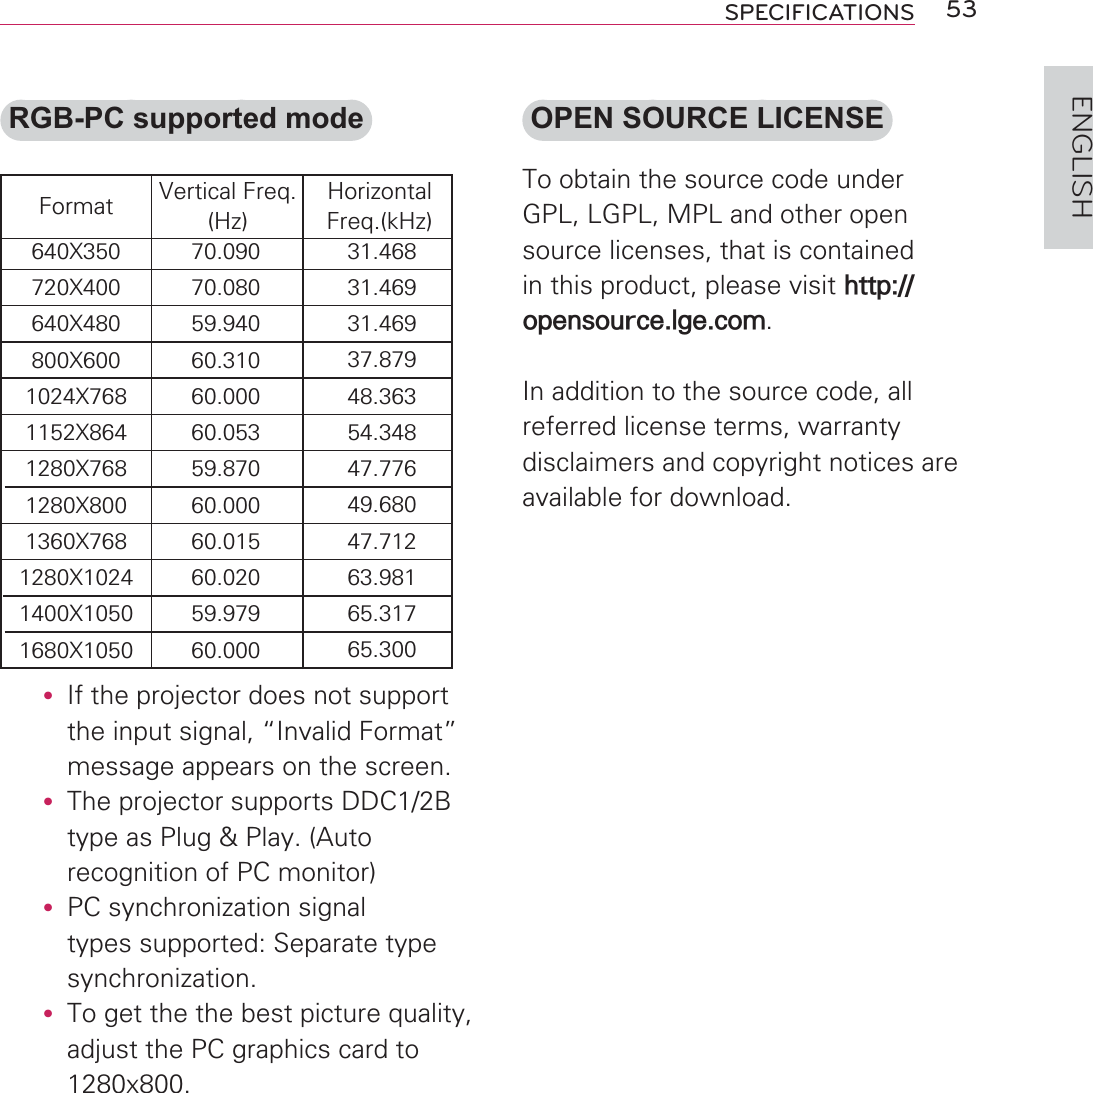 53SPECIFICATIONSENGLISHOPEN SOURCE LICENSETo obtain the source code under GPL, LGPL, MPL and other open source licenses, that is contained in this product, please visit http://opensource.lge.com.In addition to the source code, all referred license terms, warranty disclaimers and copyright notices are available for download.y If the projector does not support the input signal, “Invalid Format” message appears on the screen.y The projector supports DDC1/2B type as Plug &amp; Play. (Auto recognition of PC monitor)y PC synchronization signal types supported: Separate type synchronization.y To get the the best picture quality, adjust the PC graphics card to 1280x800.RGB-PC supported mode31.46831.46931.46937.87948.36354.34847.77649.68047.71263.98165.31765.30070.09070.08059.94060.31060.00060.05359.87060.00060.01560.02059.97960.000640X350720X400640X480800X6001024X7681152X8641280X7681280X8001360X7681280X10241400X10501680X1050Format Vertical Freq.(Hz)Horizontal Freq.(kHz)